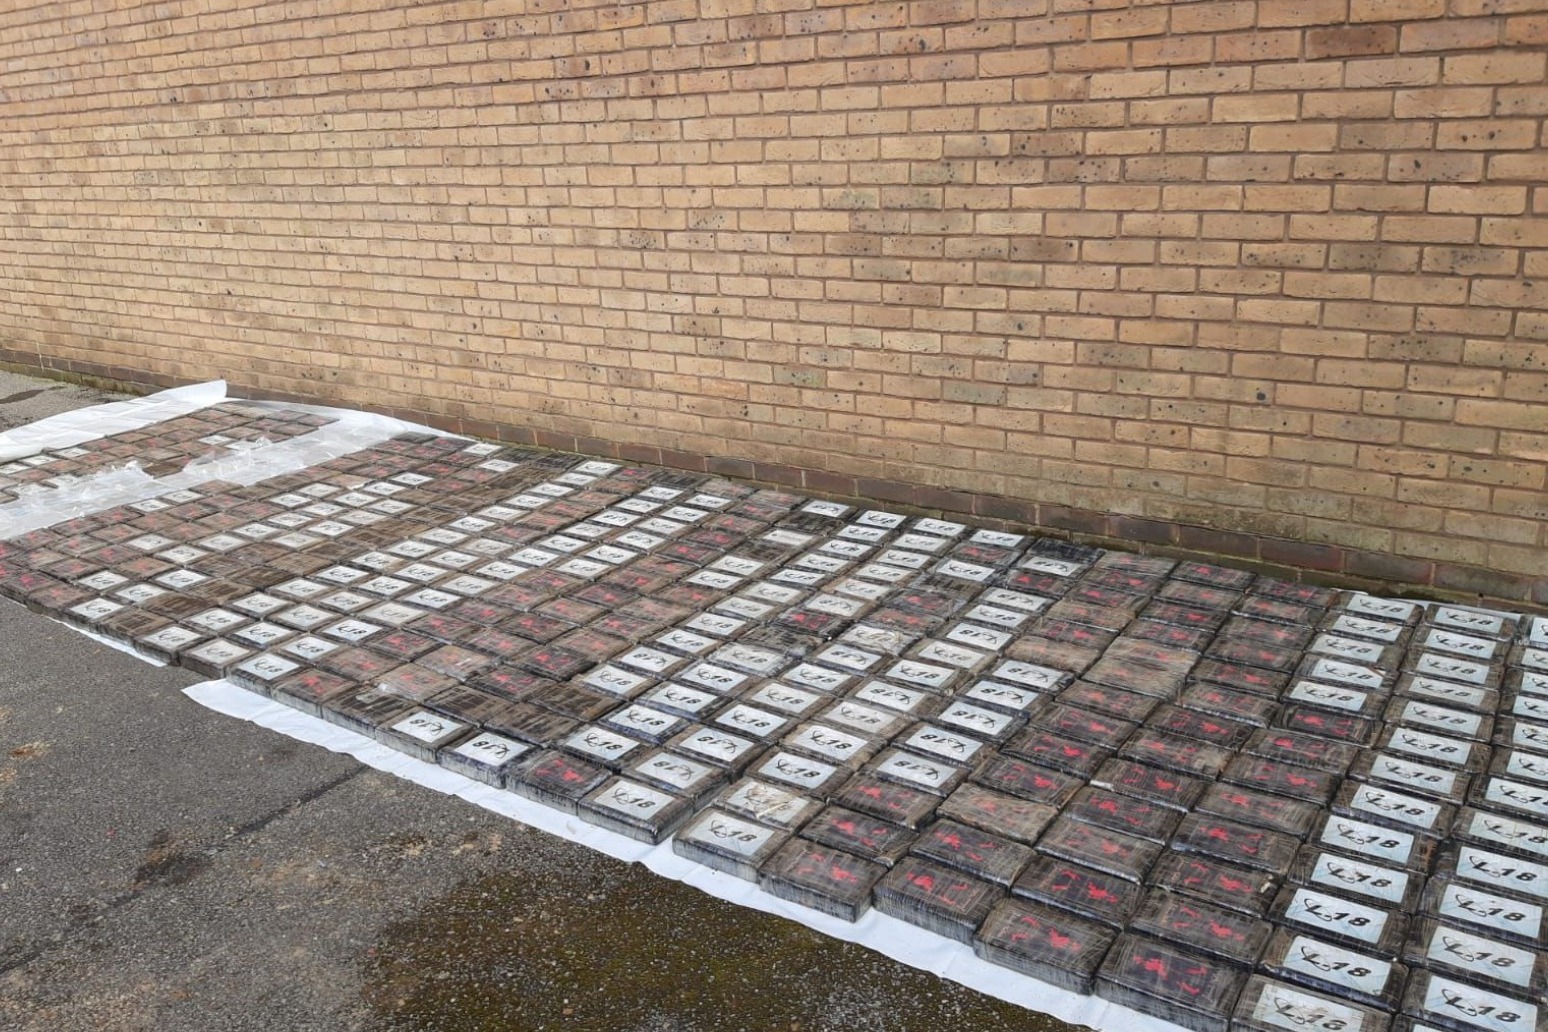 Four men charged after 500kg of cocaine seized in car park. 